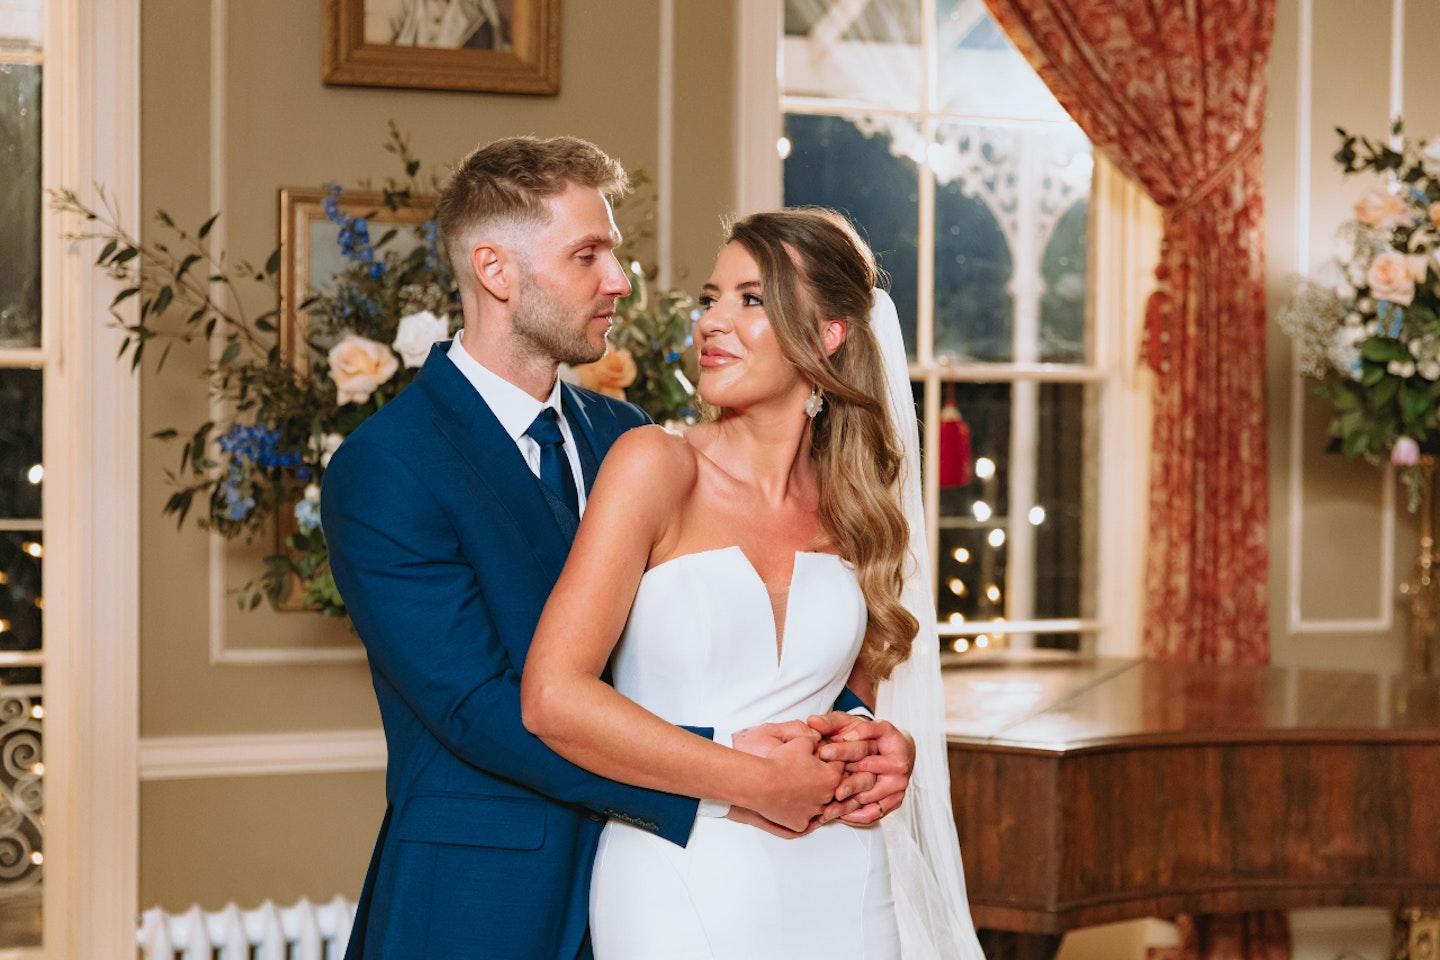 Laura and Arthur on their wedding day on MAFS UK